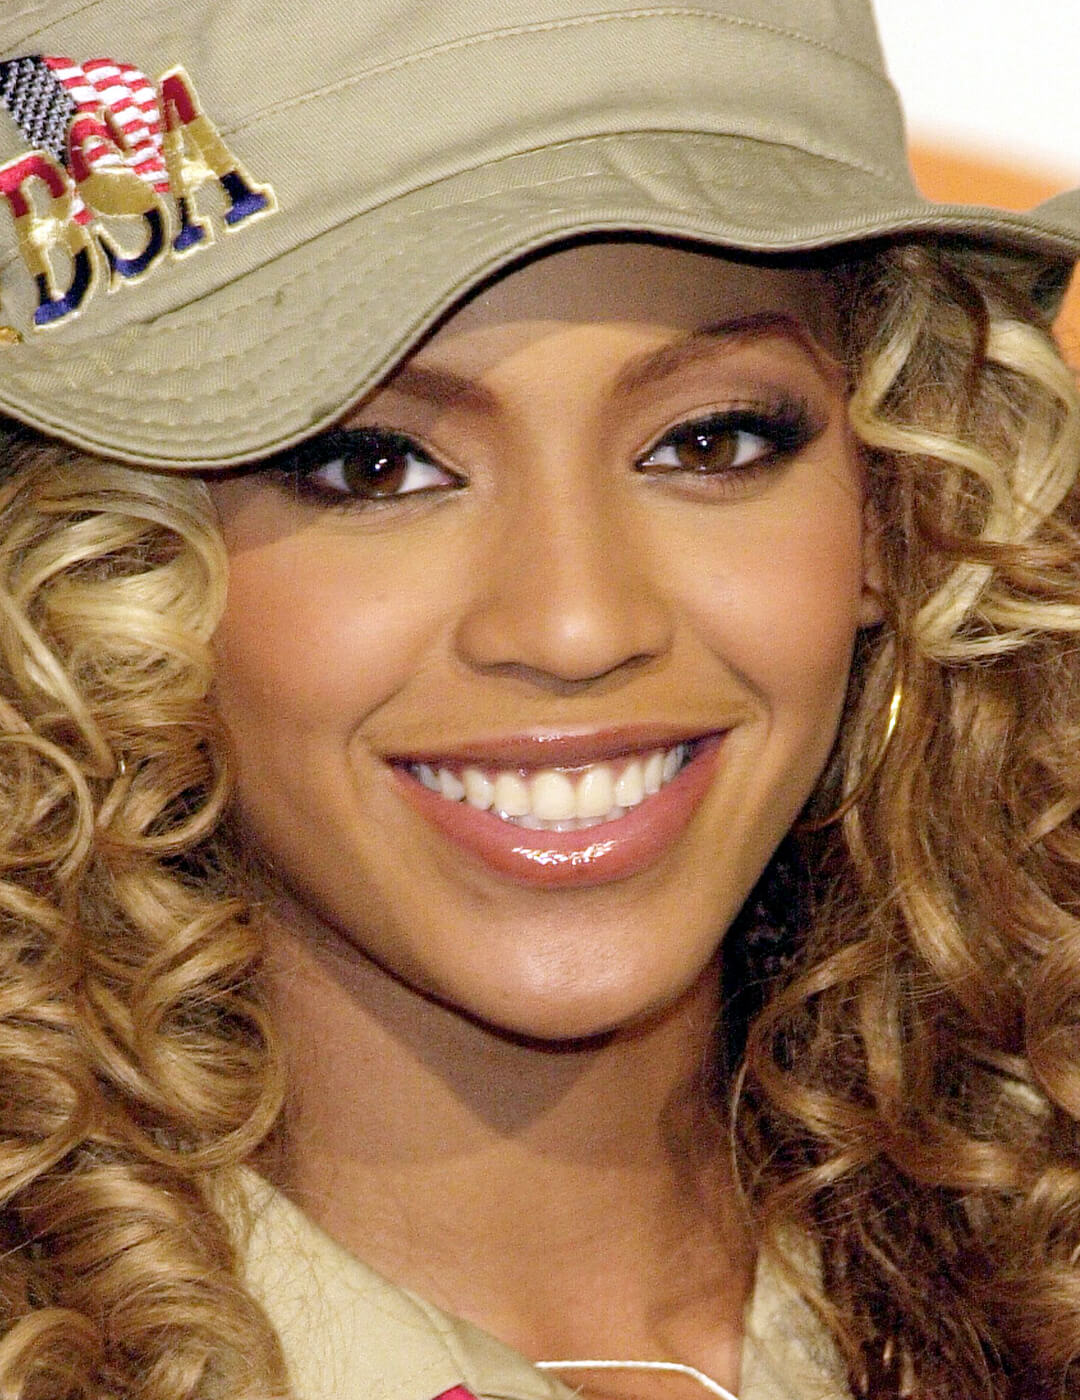 Younger Beyoncé rocking soft smoky eyes and glossy lips